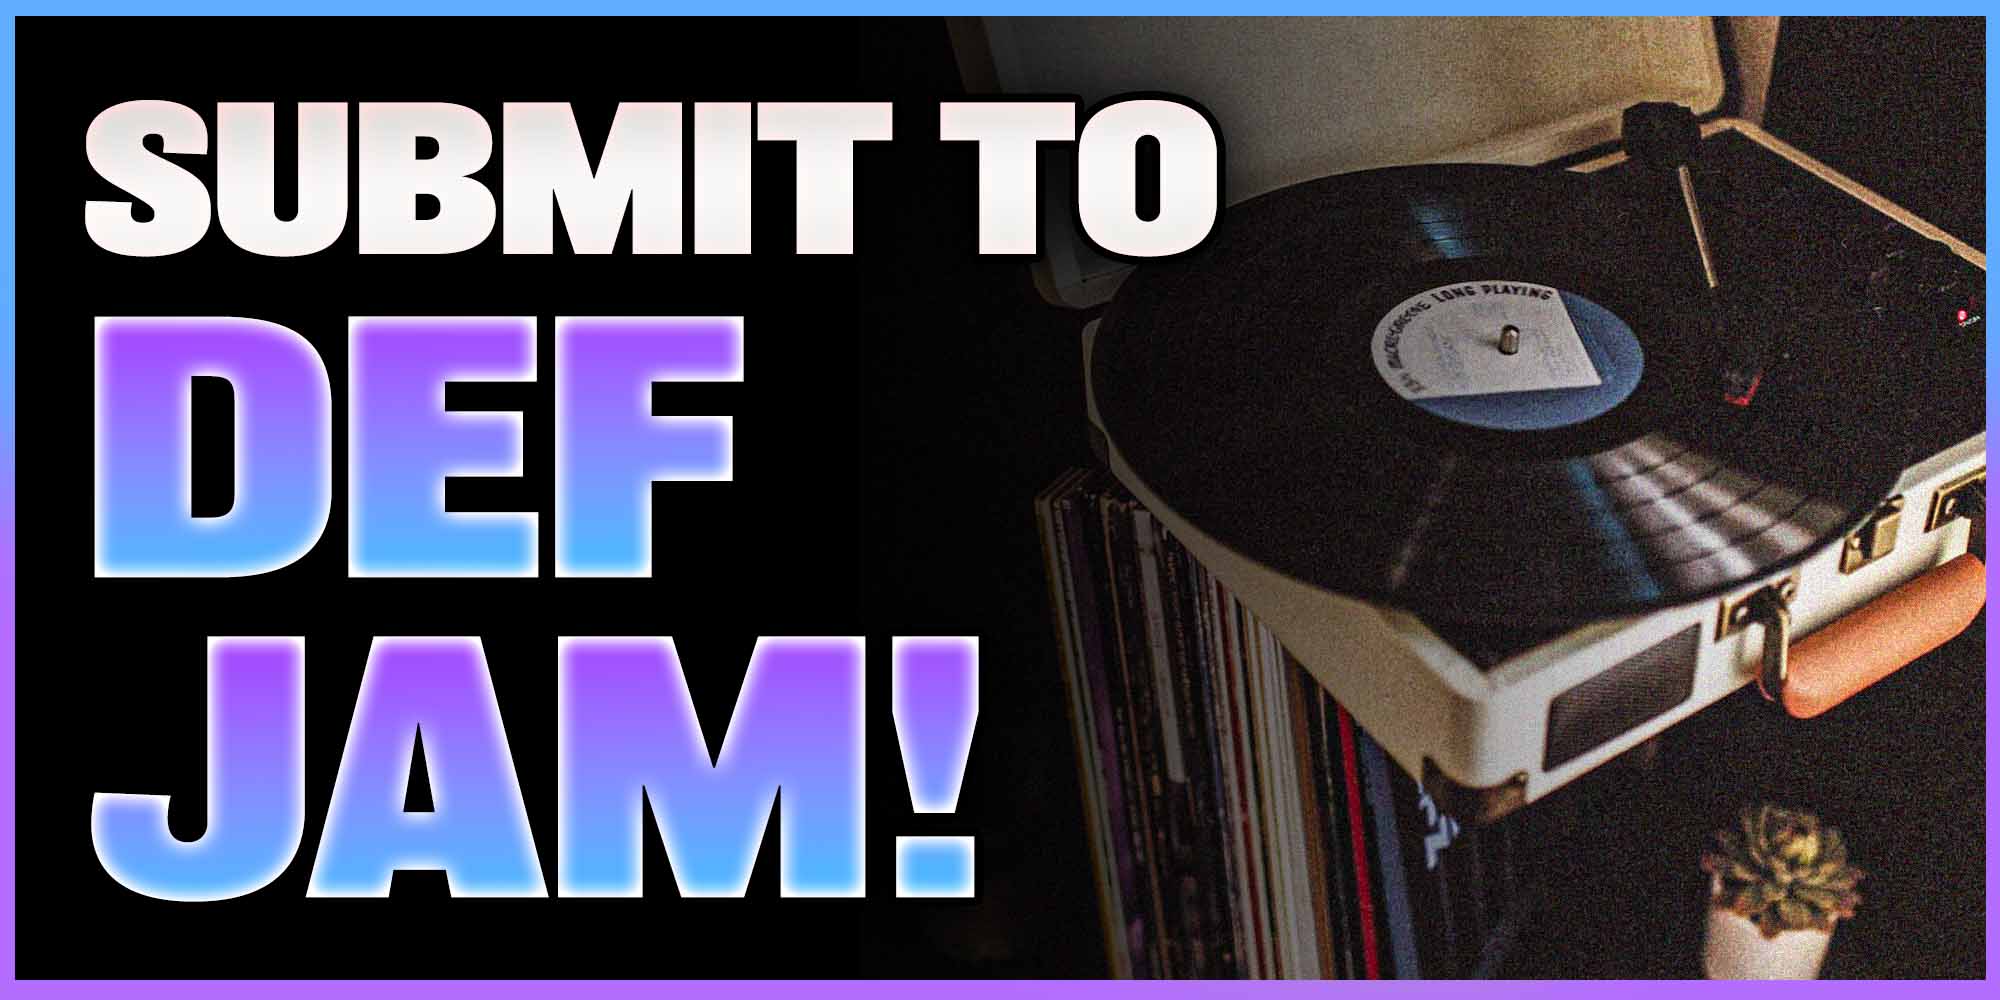 Def Jam Music Group Inc. Label, Releases